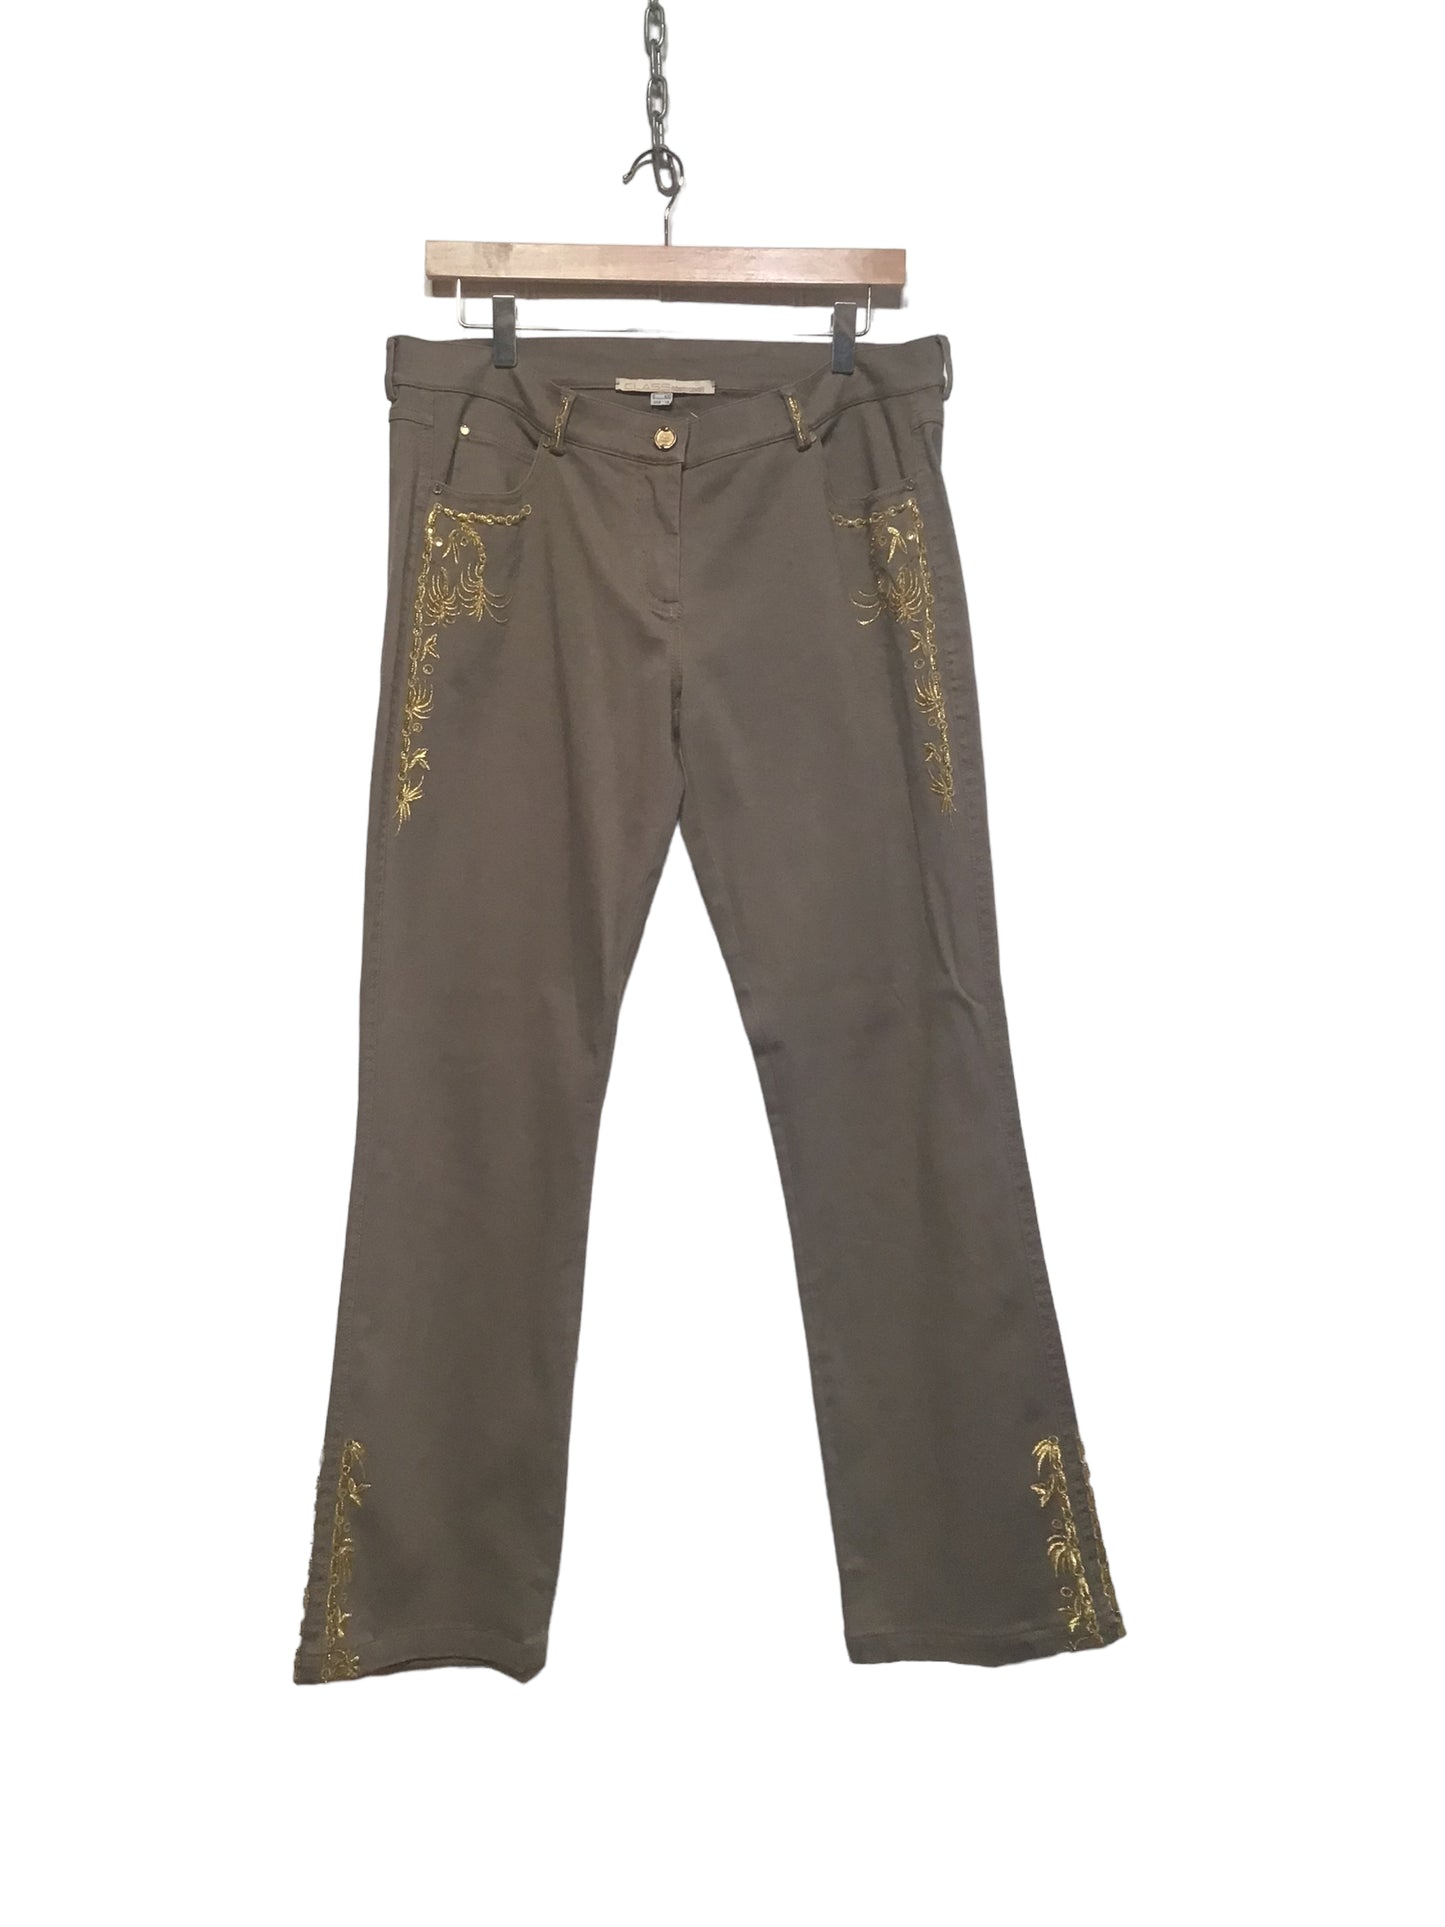 Roberto Cavalli Class Embellished Trousers (Size L)